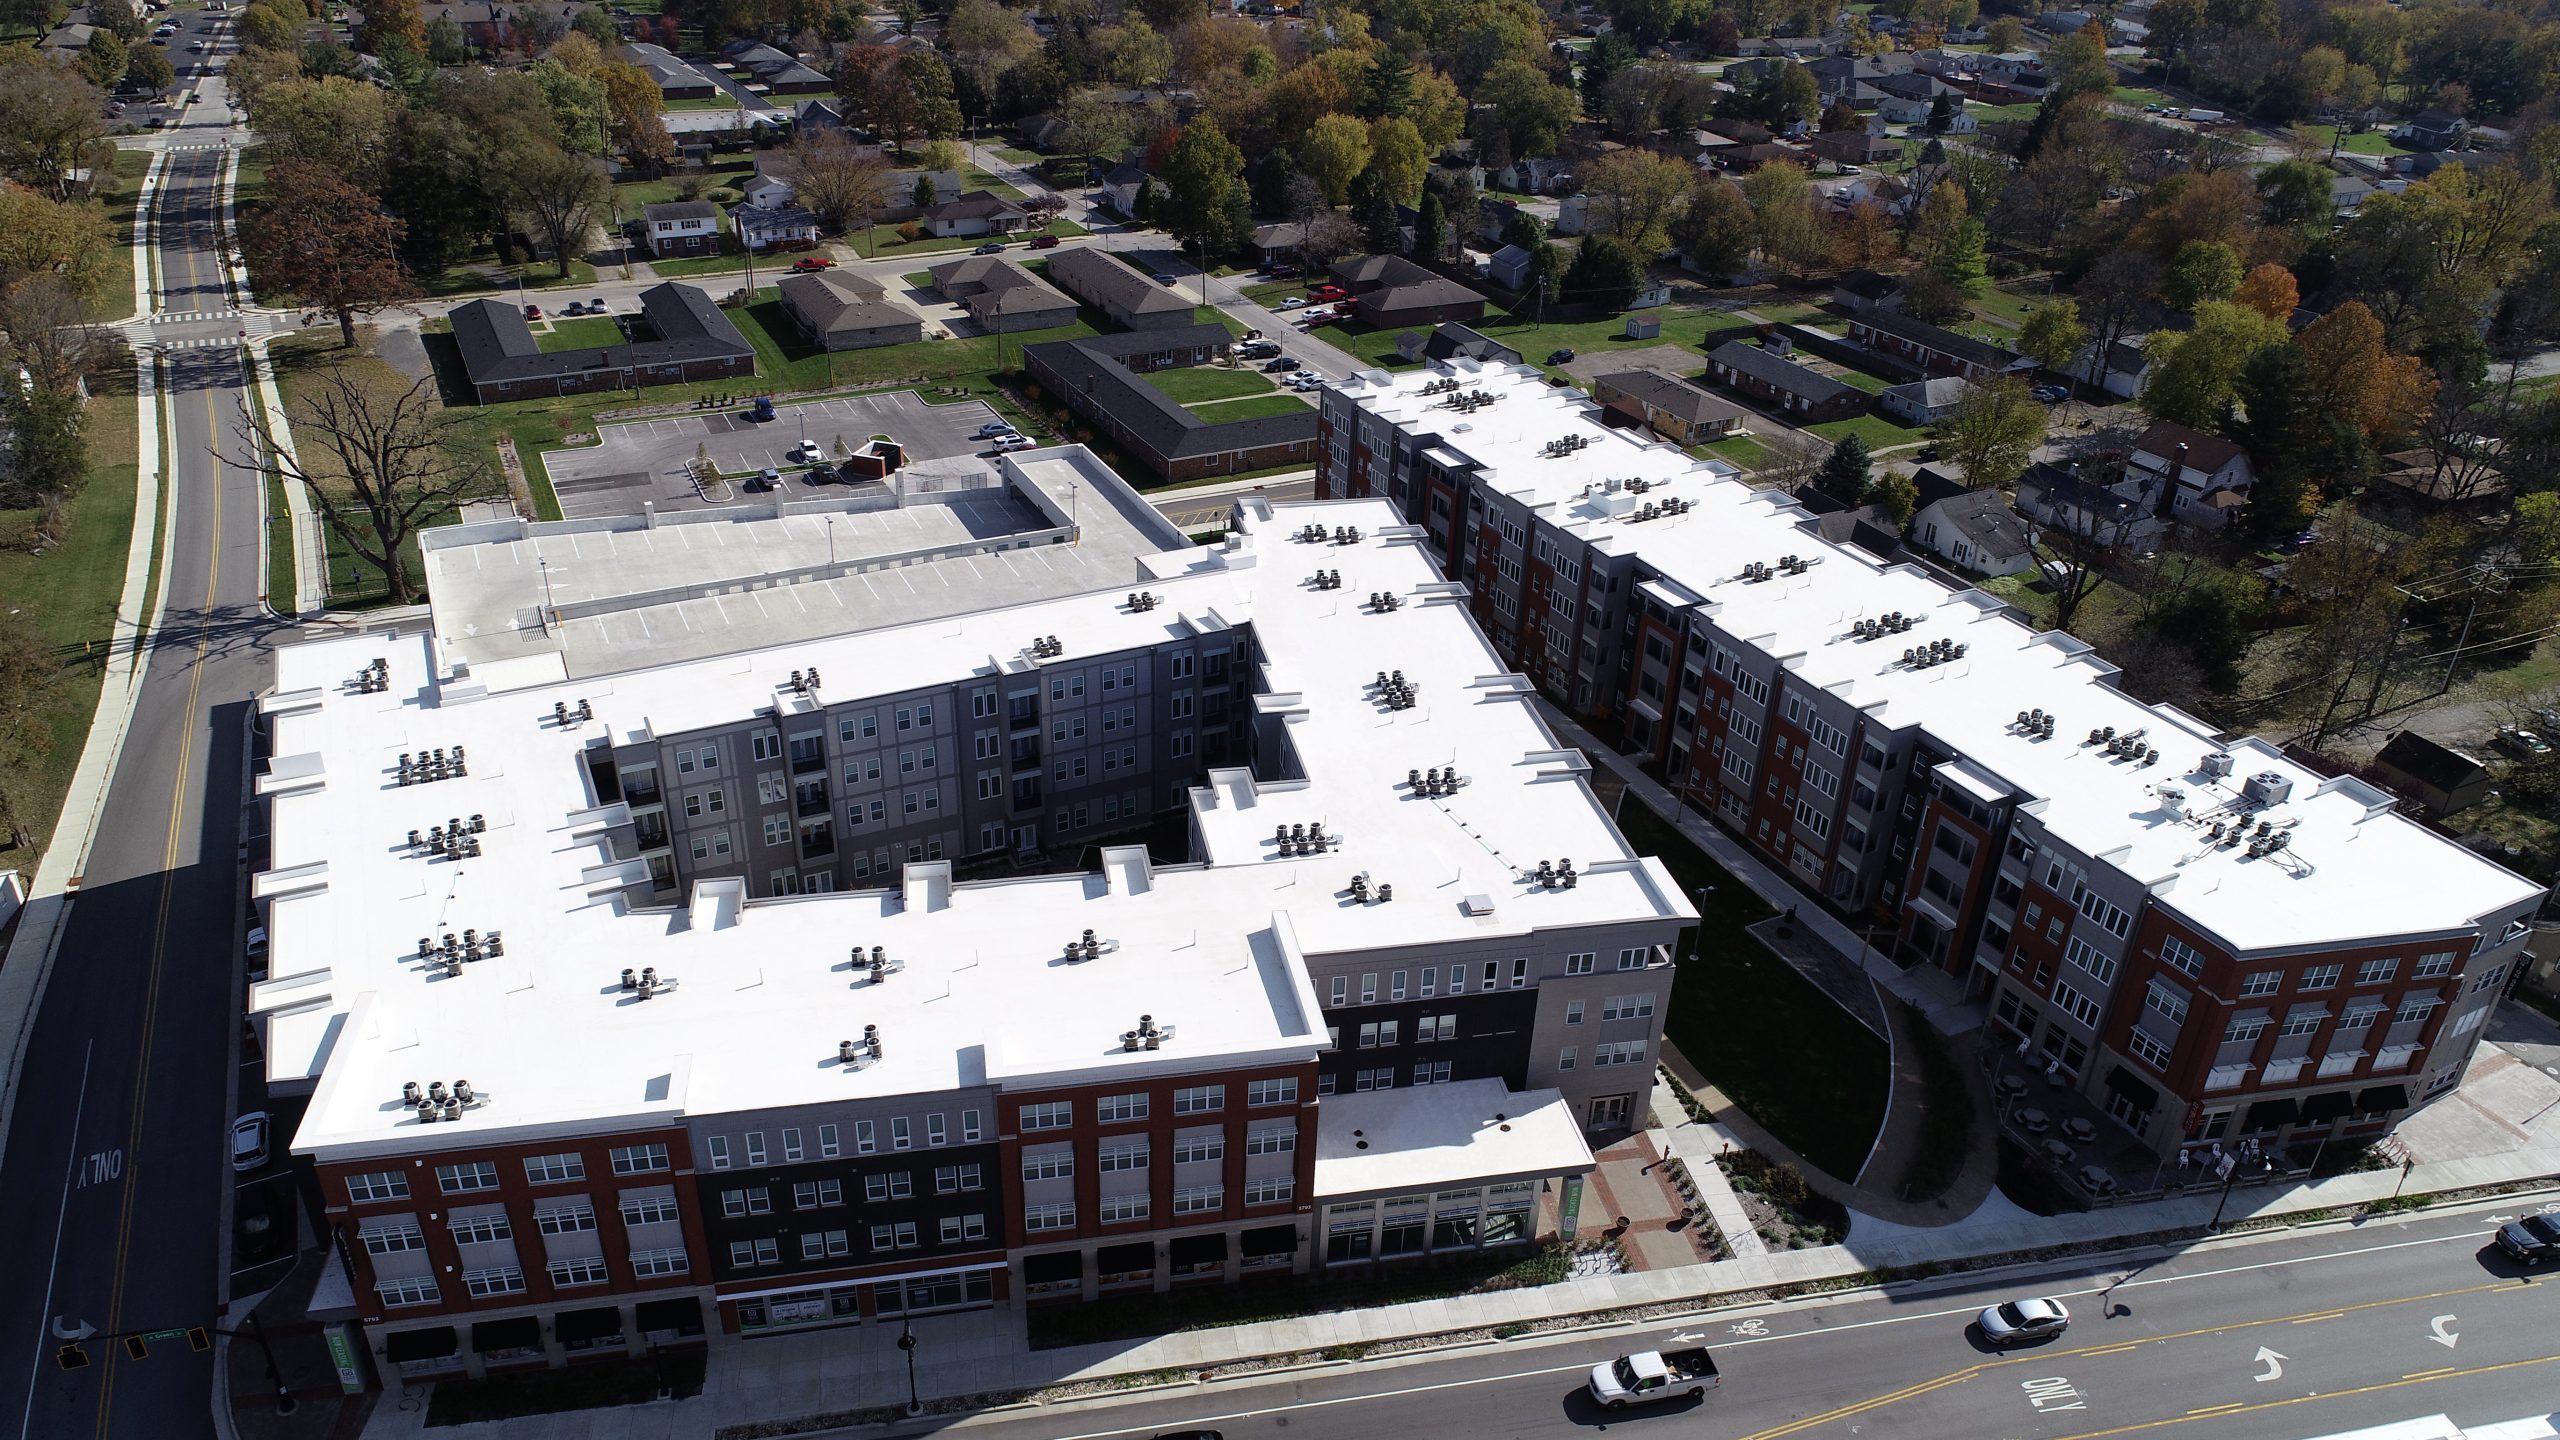 brownburg town center commercial roofing project by ce reeve roofing in indiana